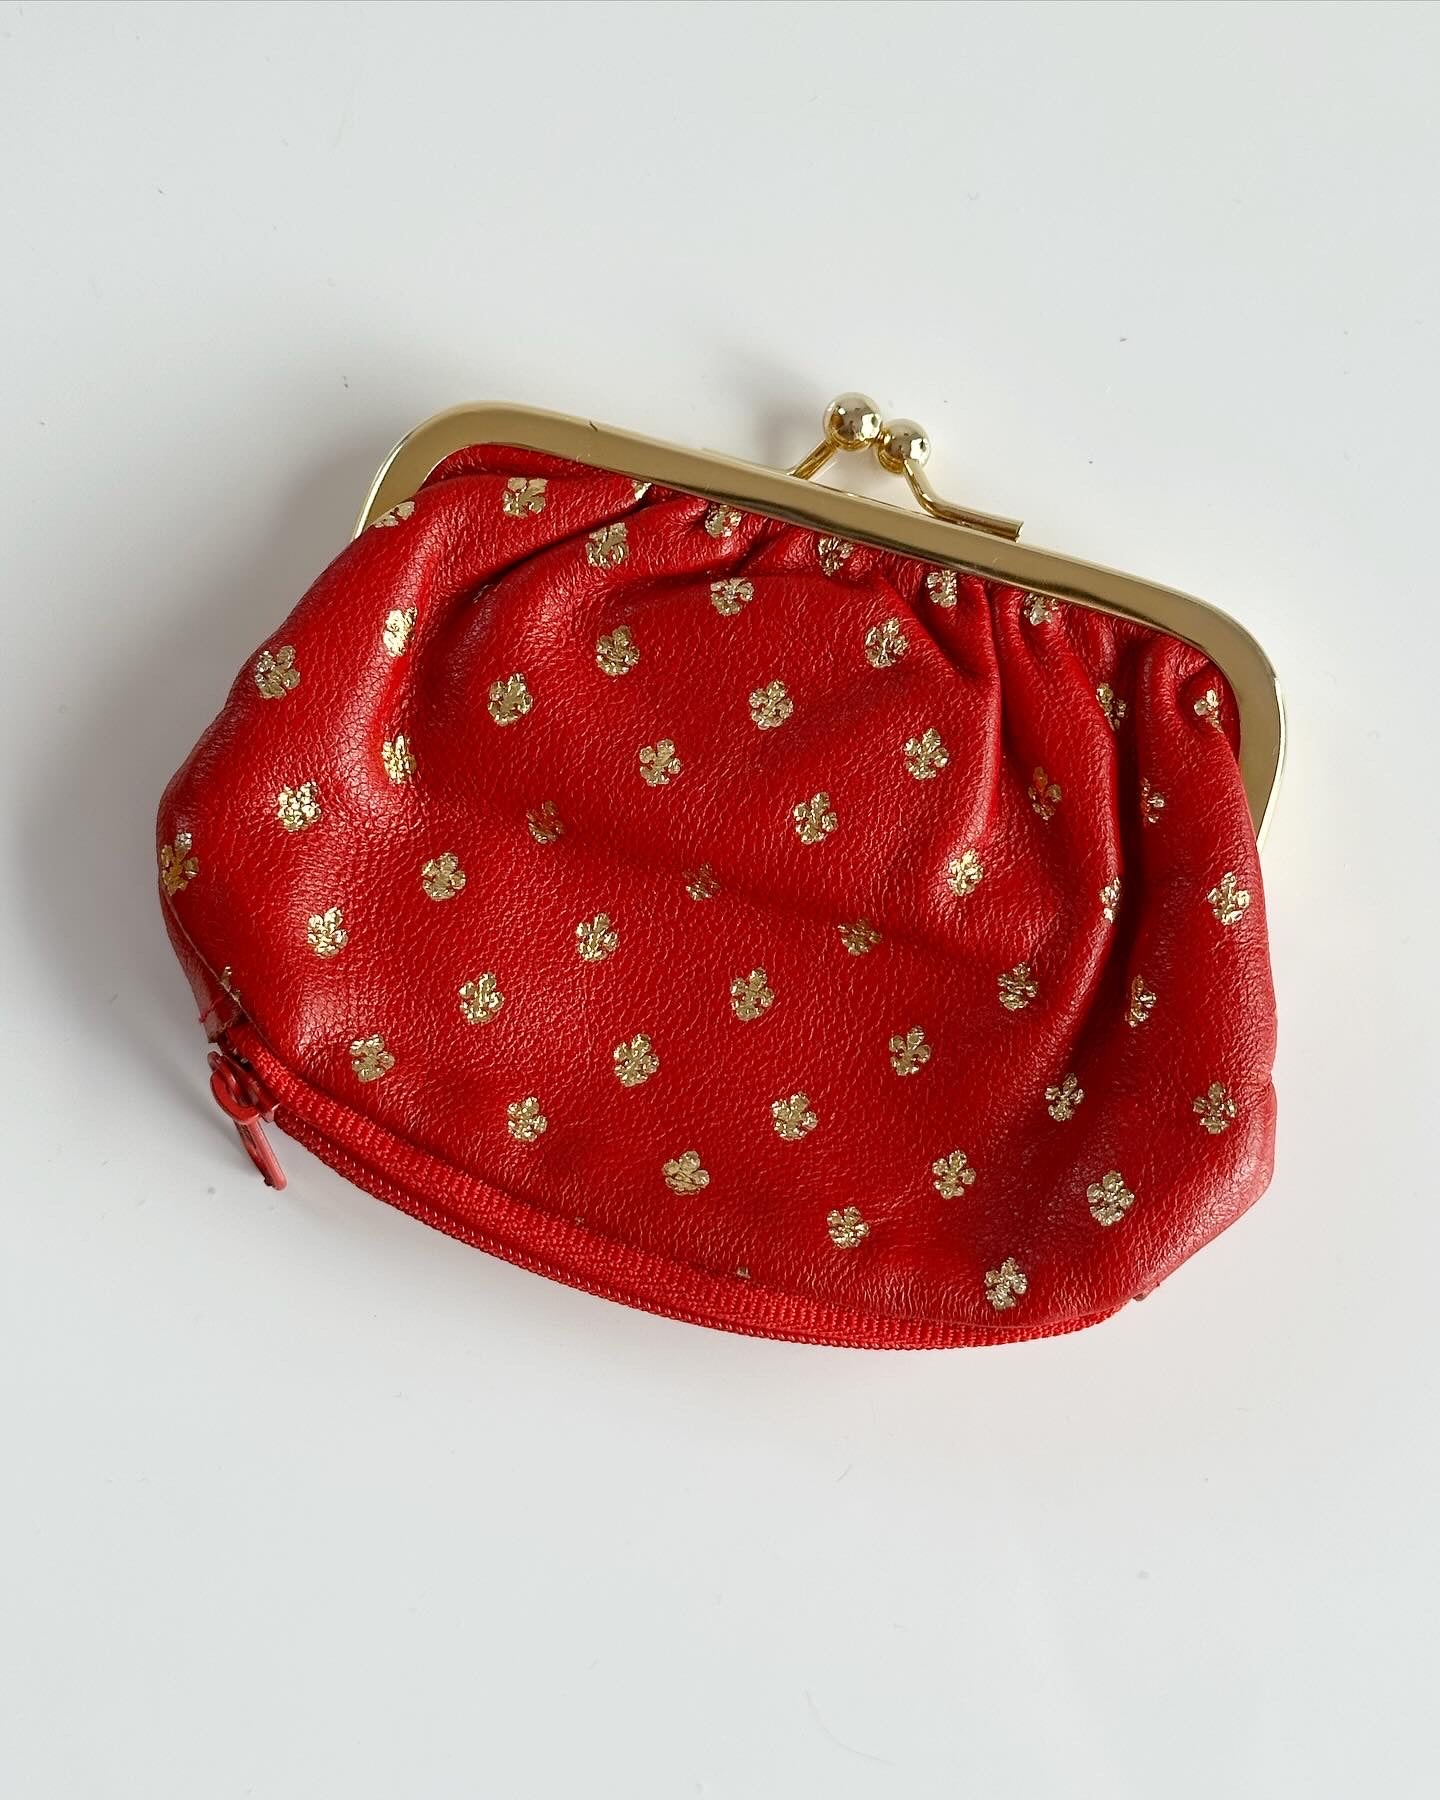 Small vintage leather red purse